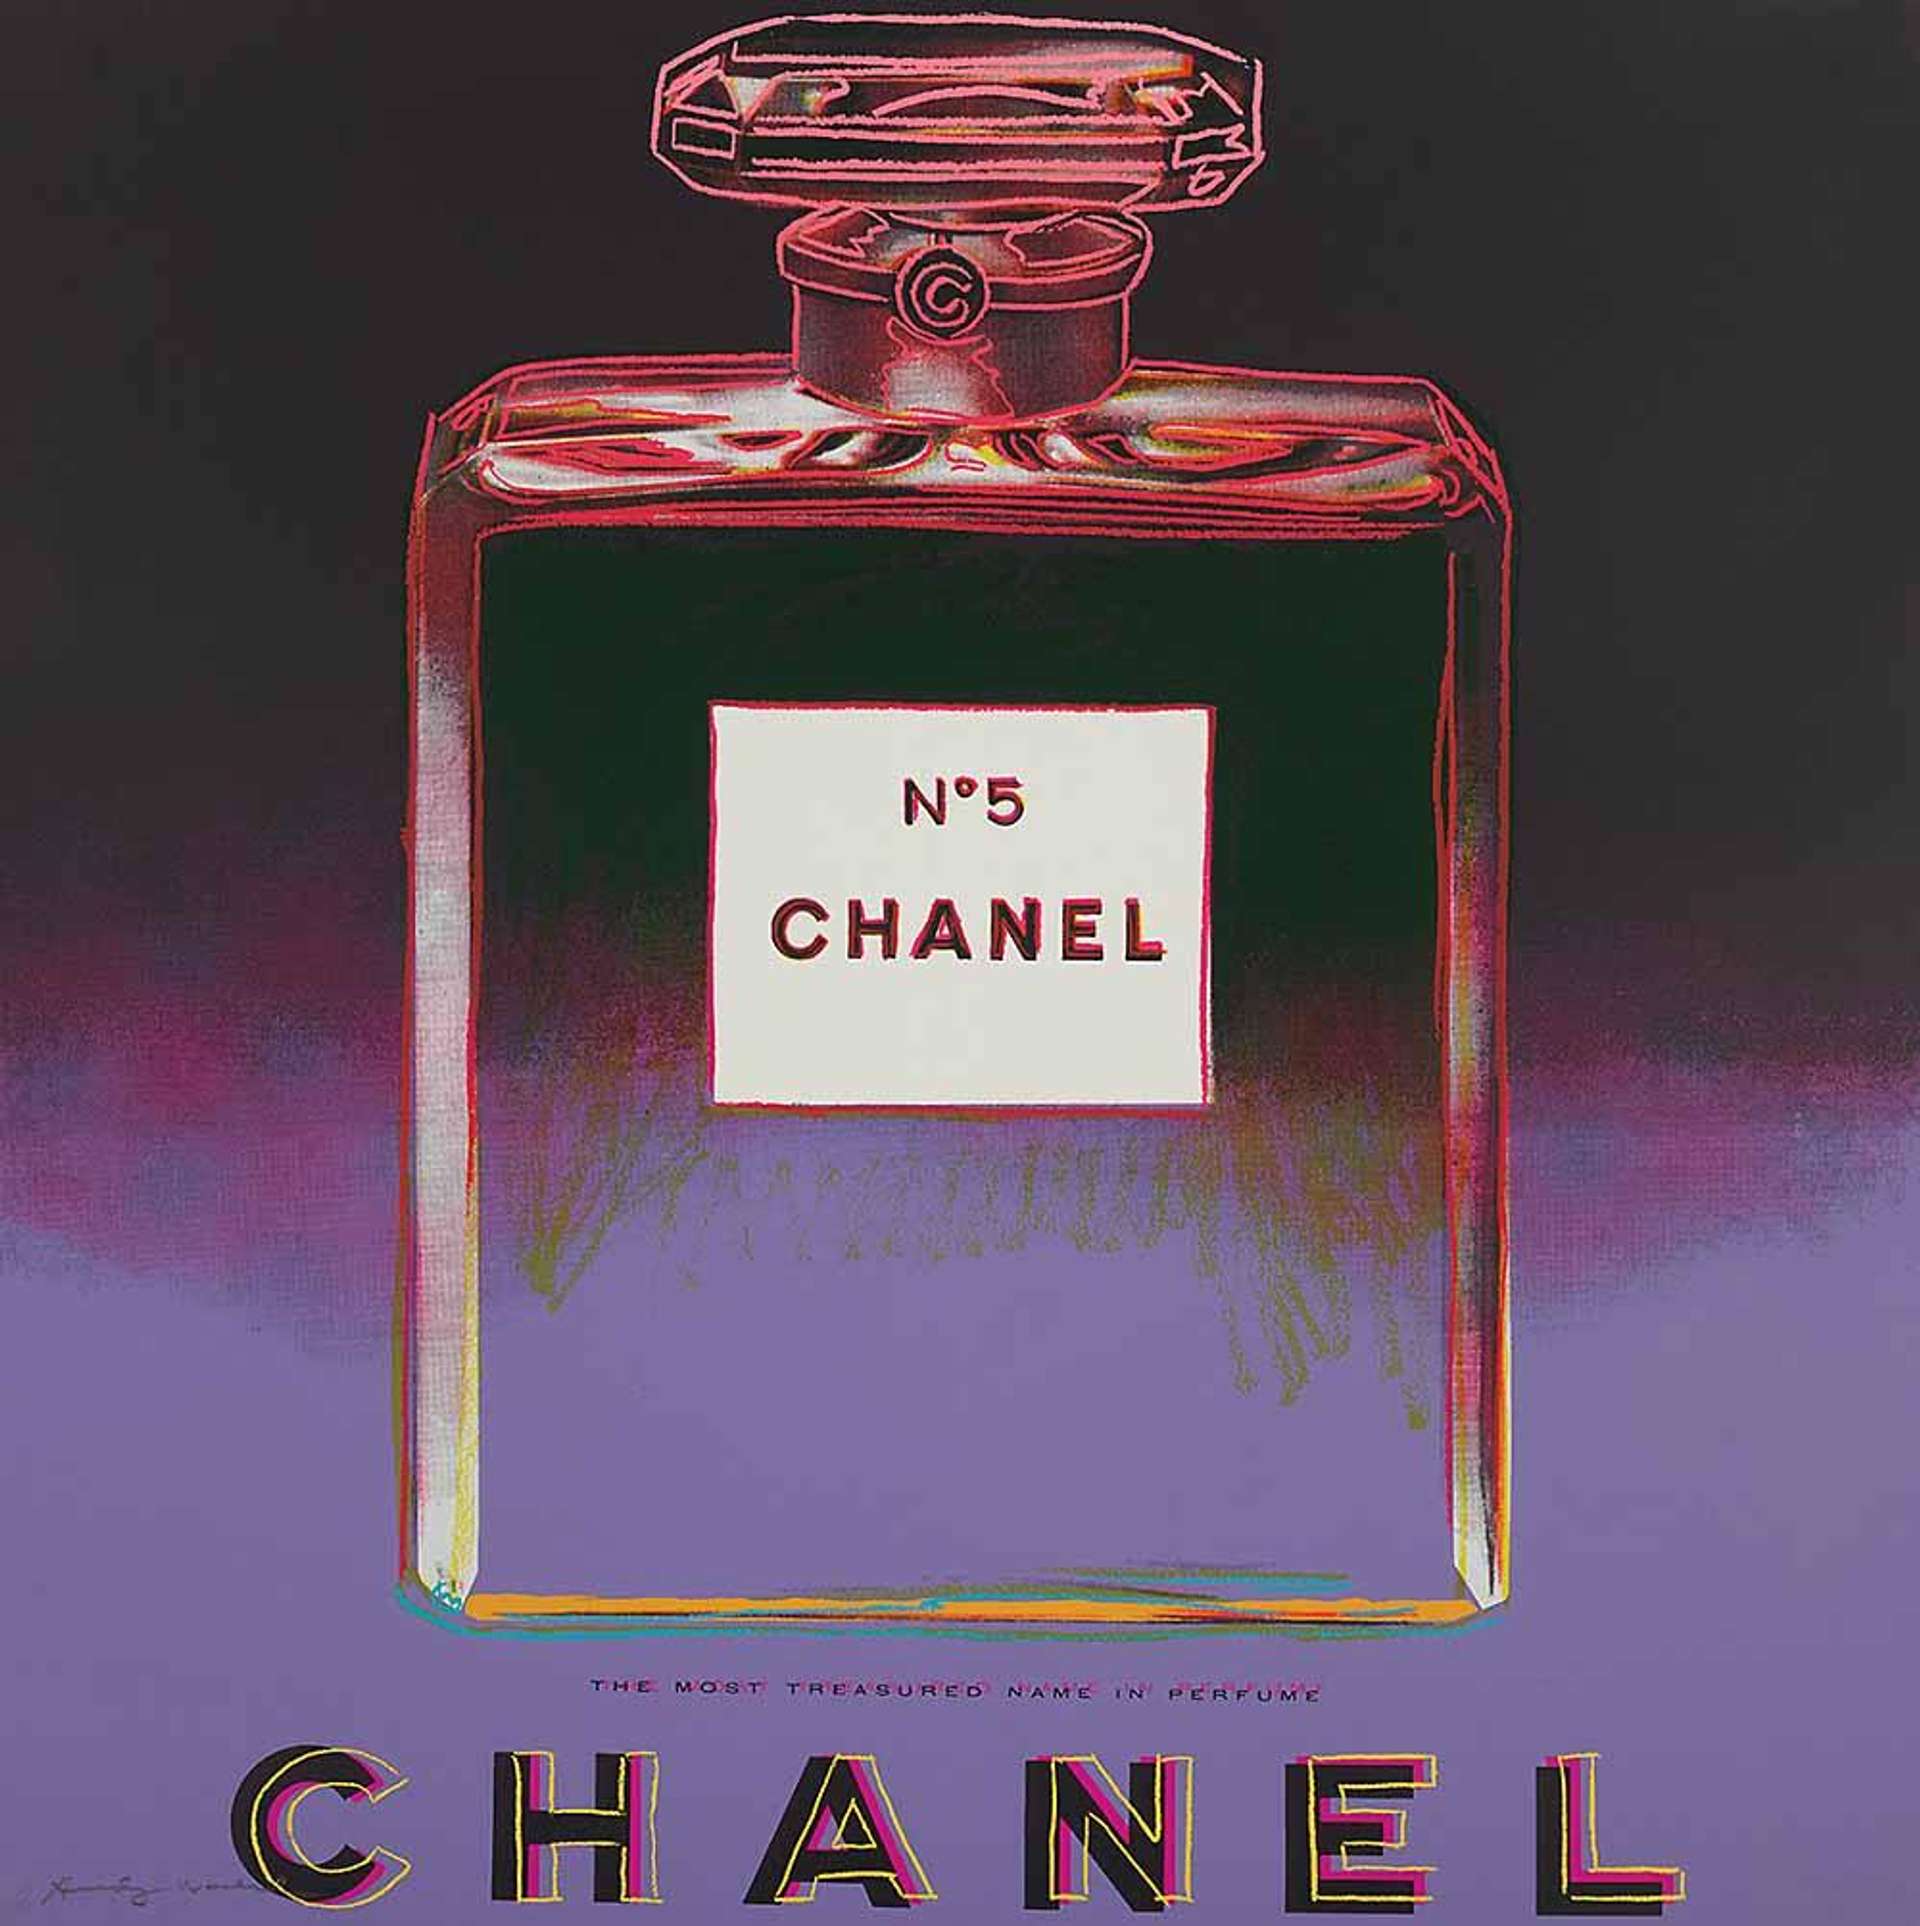 A Chanel No. 5 perfume bottle appears at the centre of the composition, outlines in pink against a purple background. The brand name Chanel appears in type at the bottom of the work